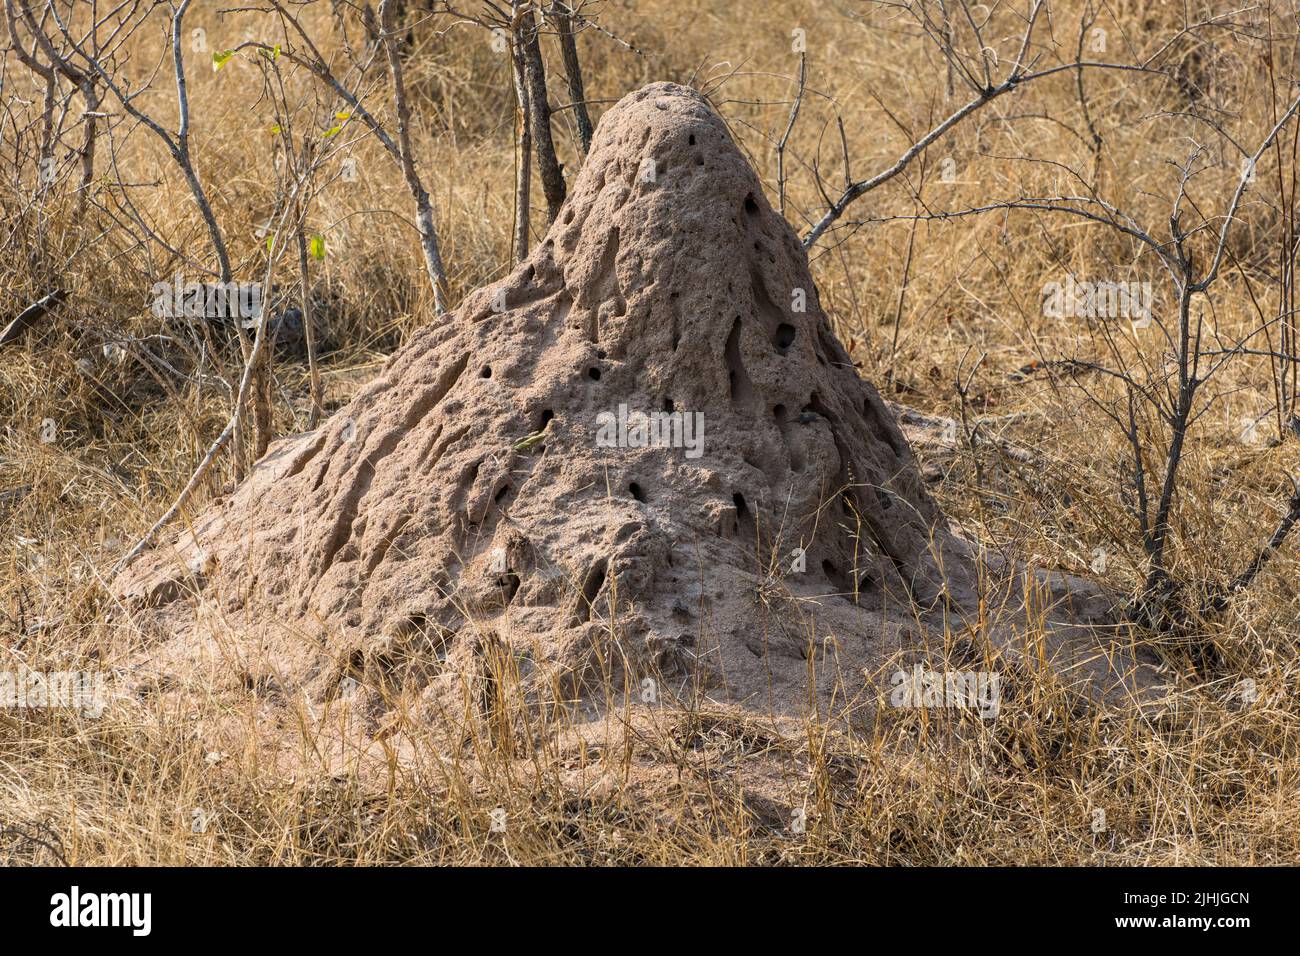 Termites nest in the Kruger Park, South Africa. Stock Photo